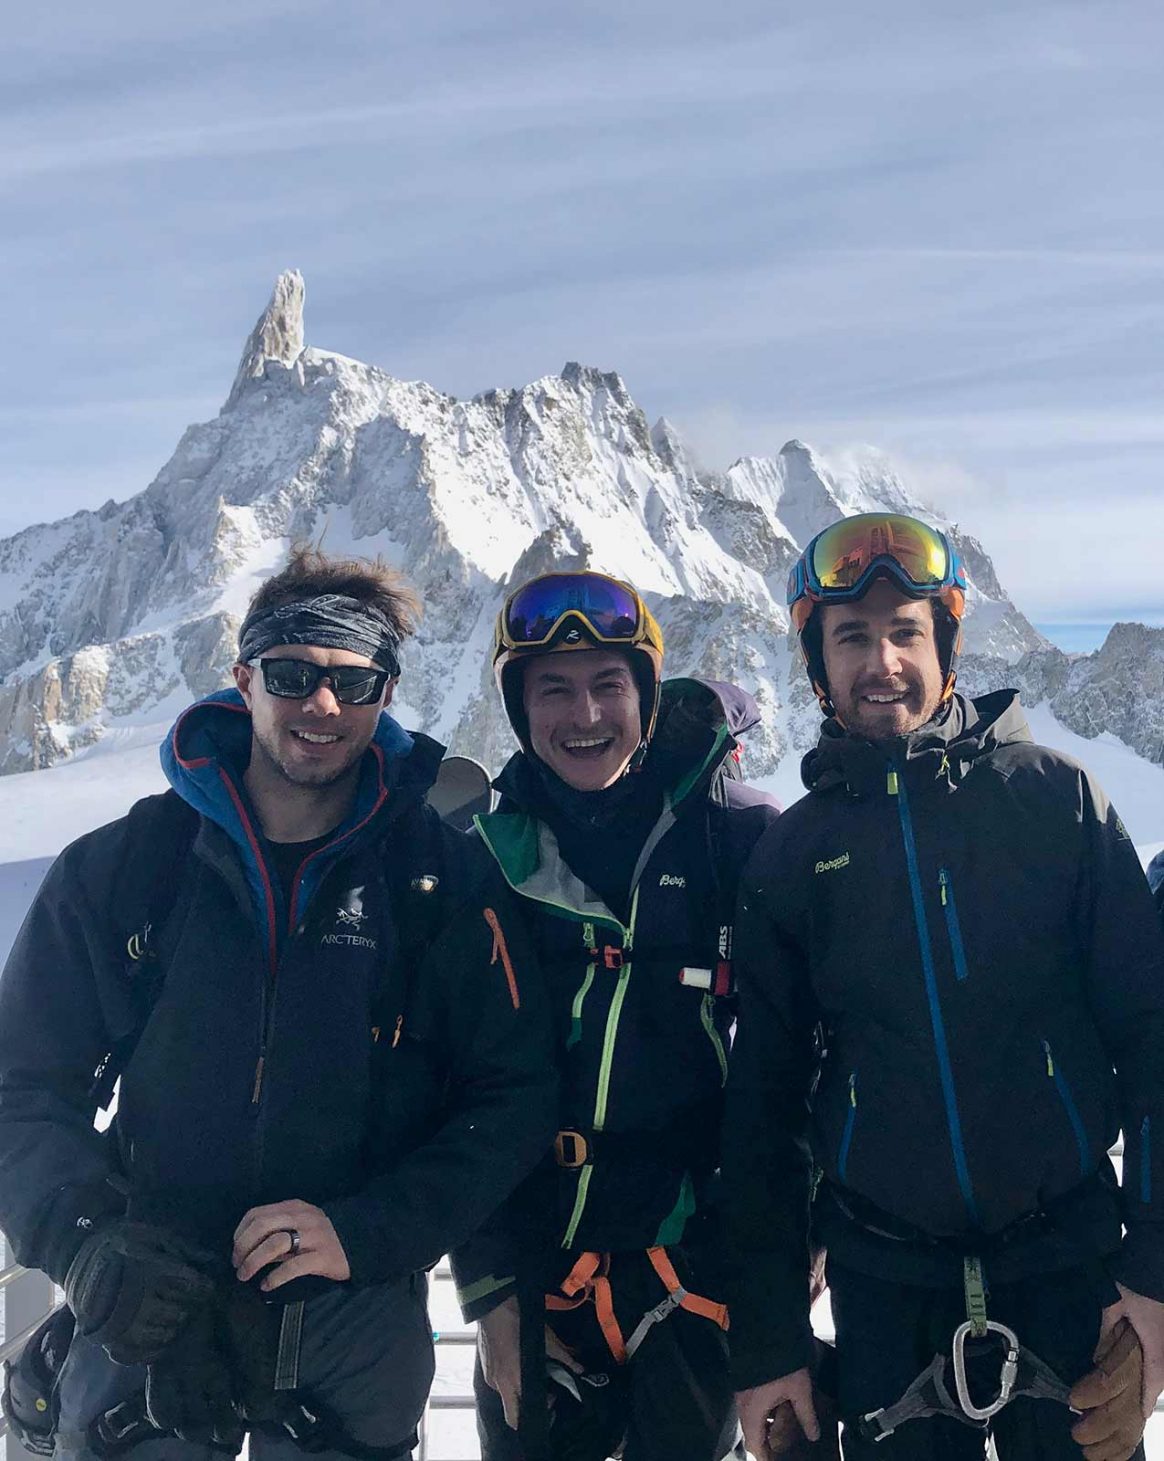 _WEB-NEW-4FRNT-OWNERS-Charlie,-Ebi,-Will-in-Italy-at-the-top-of-the-Skyway-Monte-Bianco-with-Monte-Bianco-the-background-before-skiing-the-Valley-Noir.-